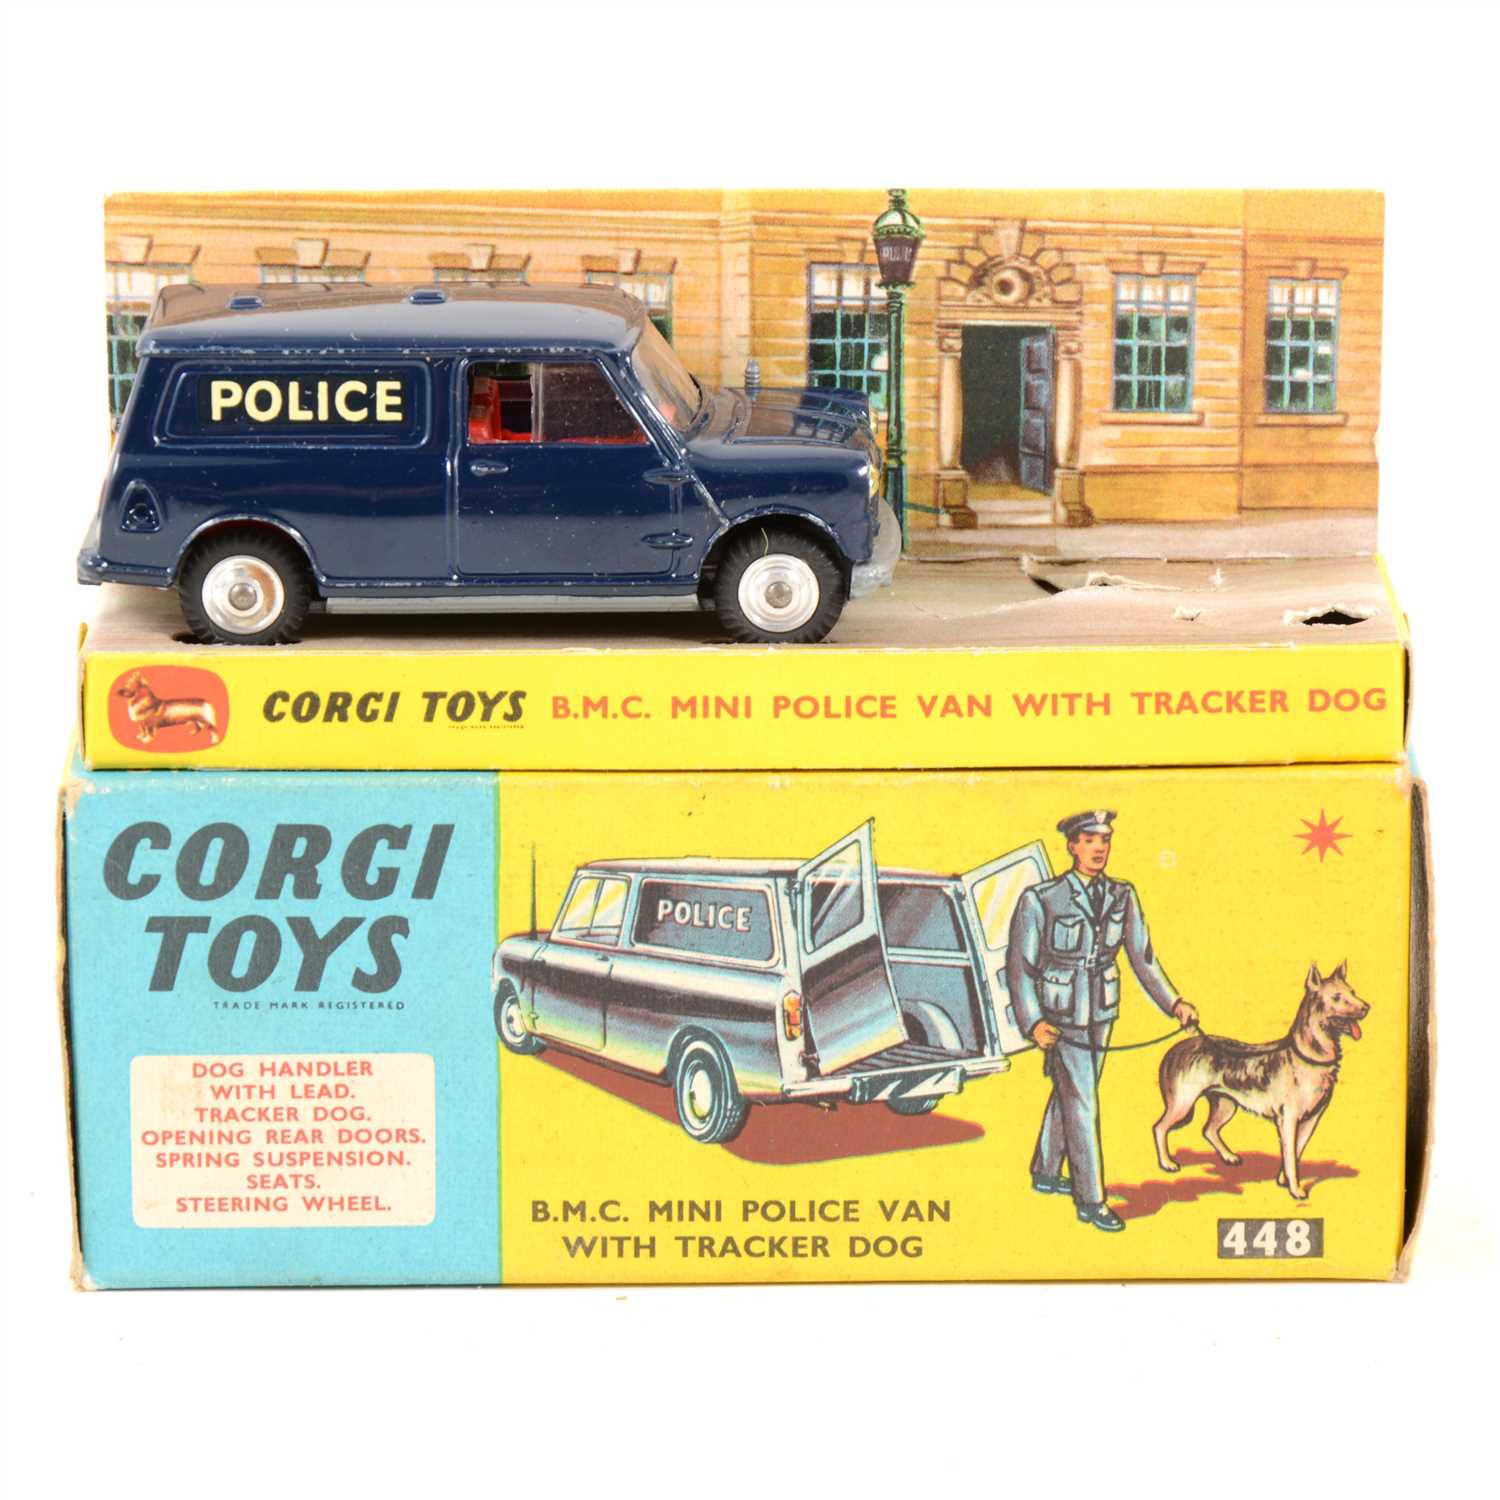 Lot 169 - Corgi Toys; 448 BMC Mini Police Van with tracker dog, (missing figure and dog), boxed with inner tray.